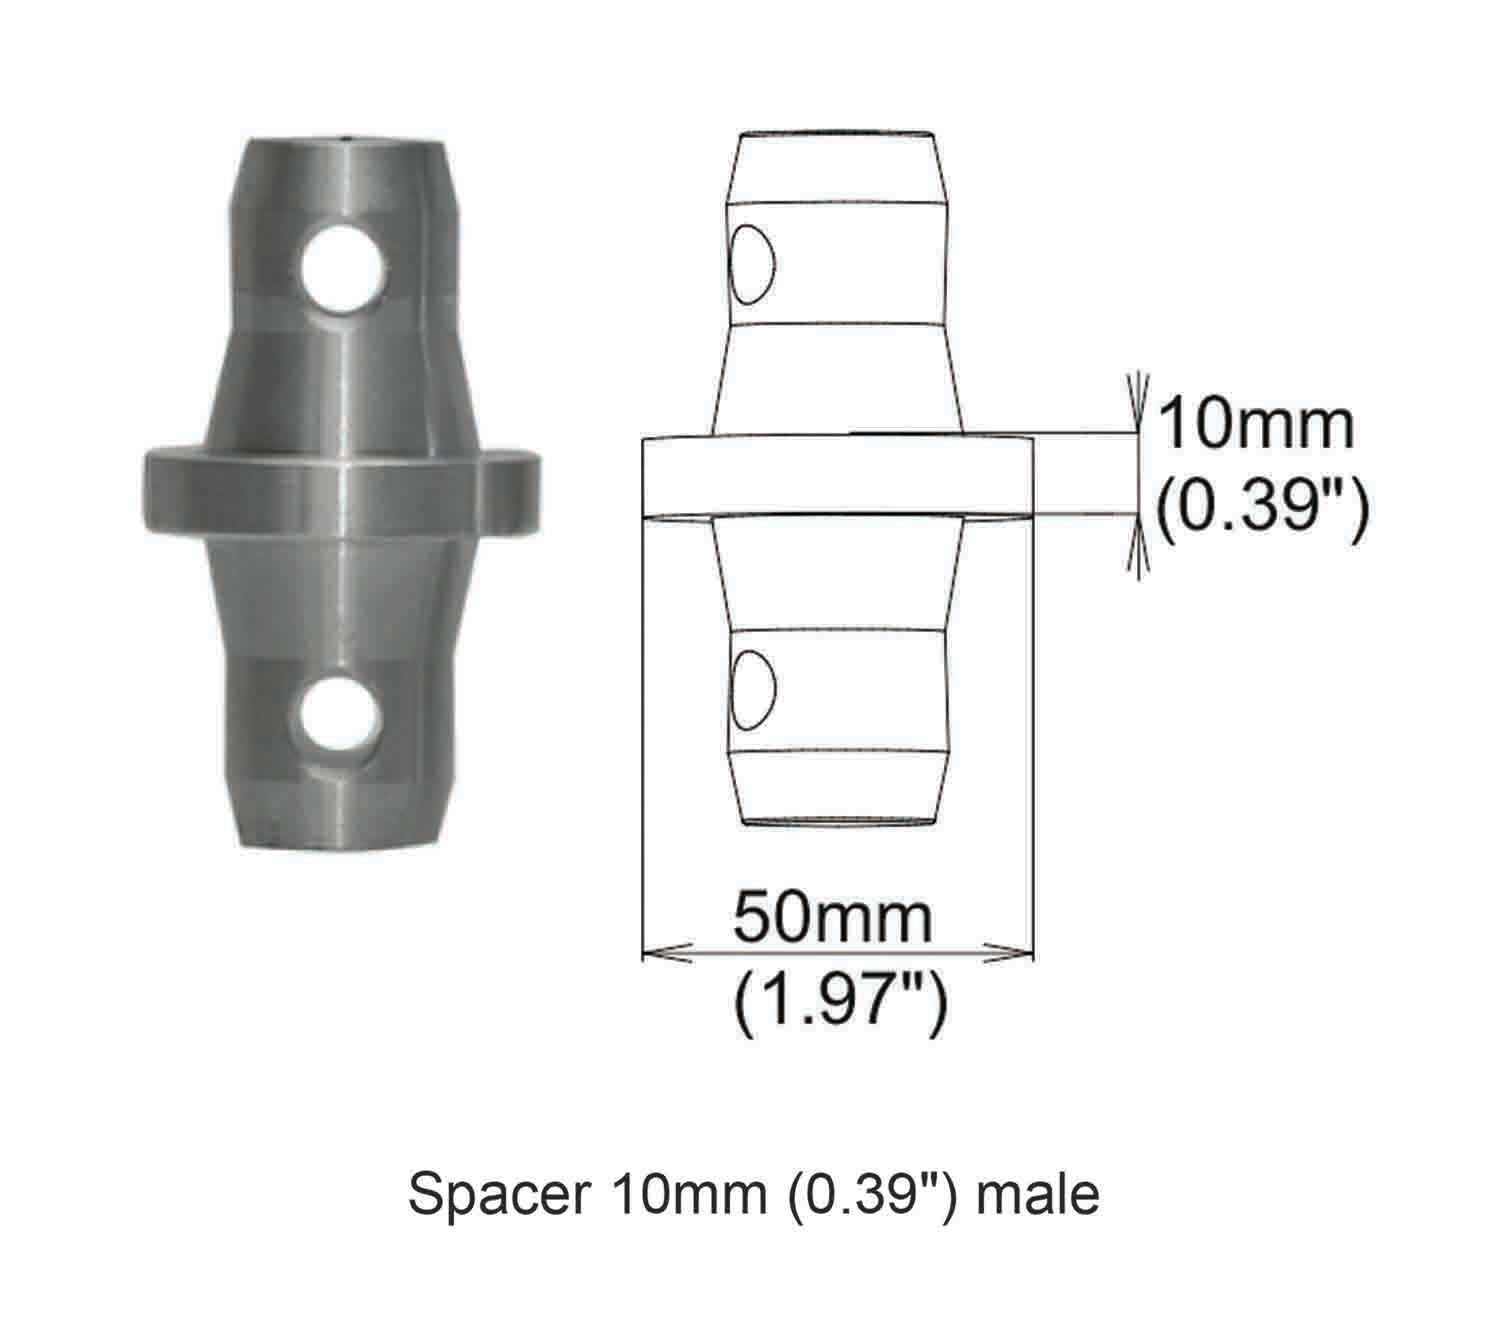 ProX XT-SPMM10 Spacer 10mm Male Coupler - Hollywood DJ